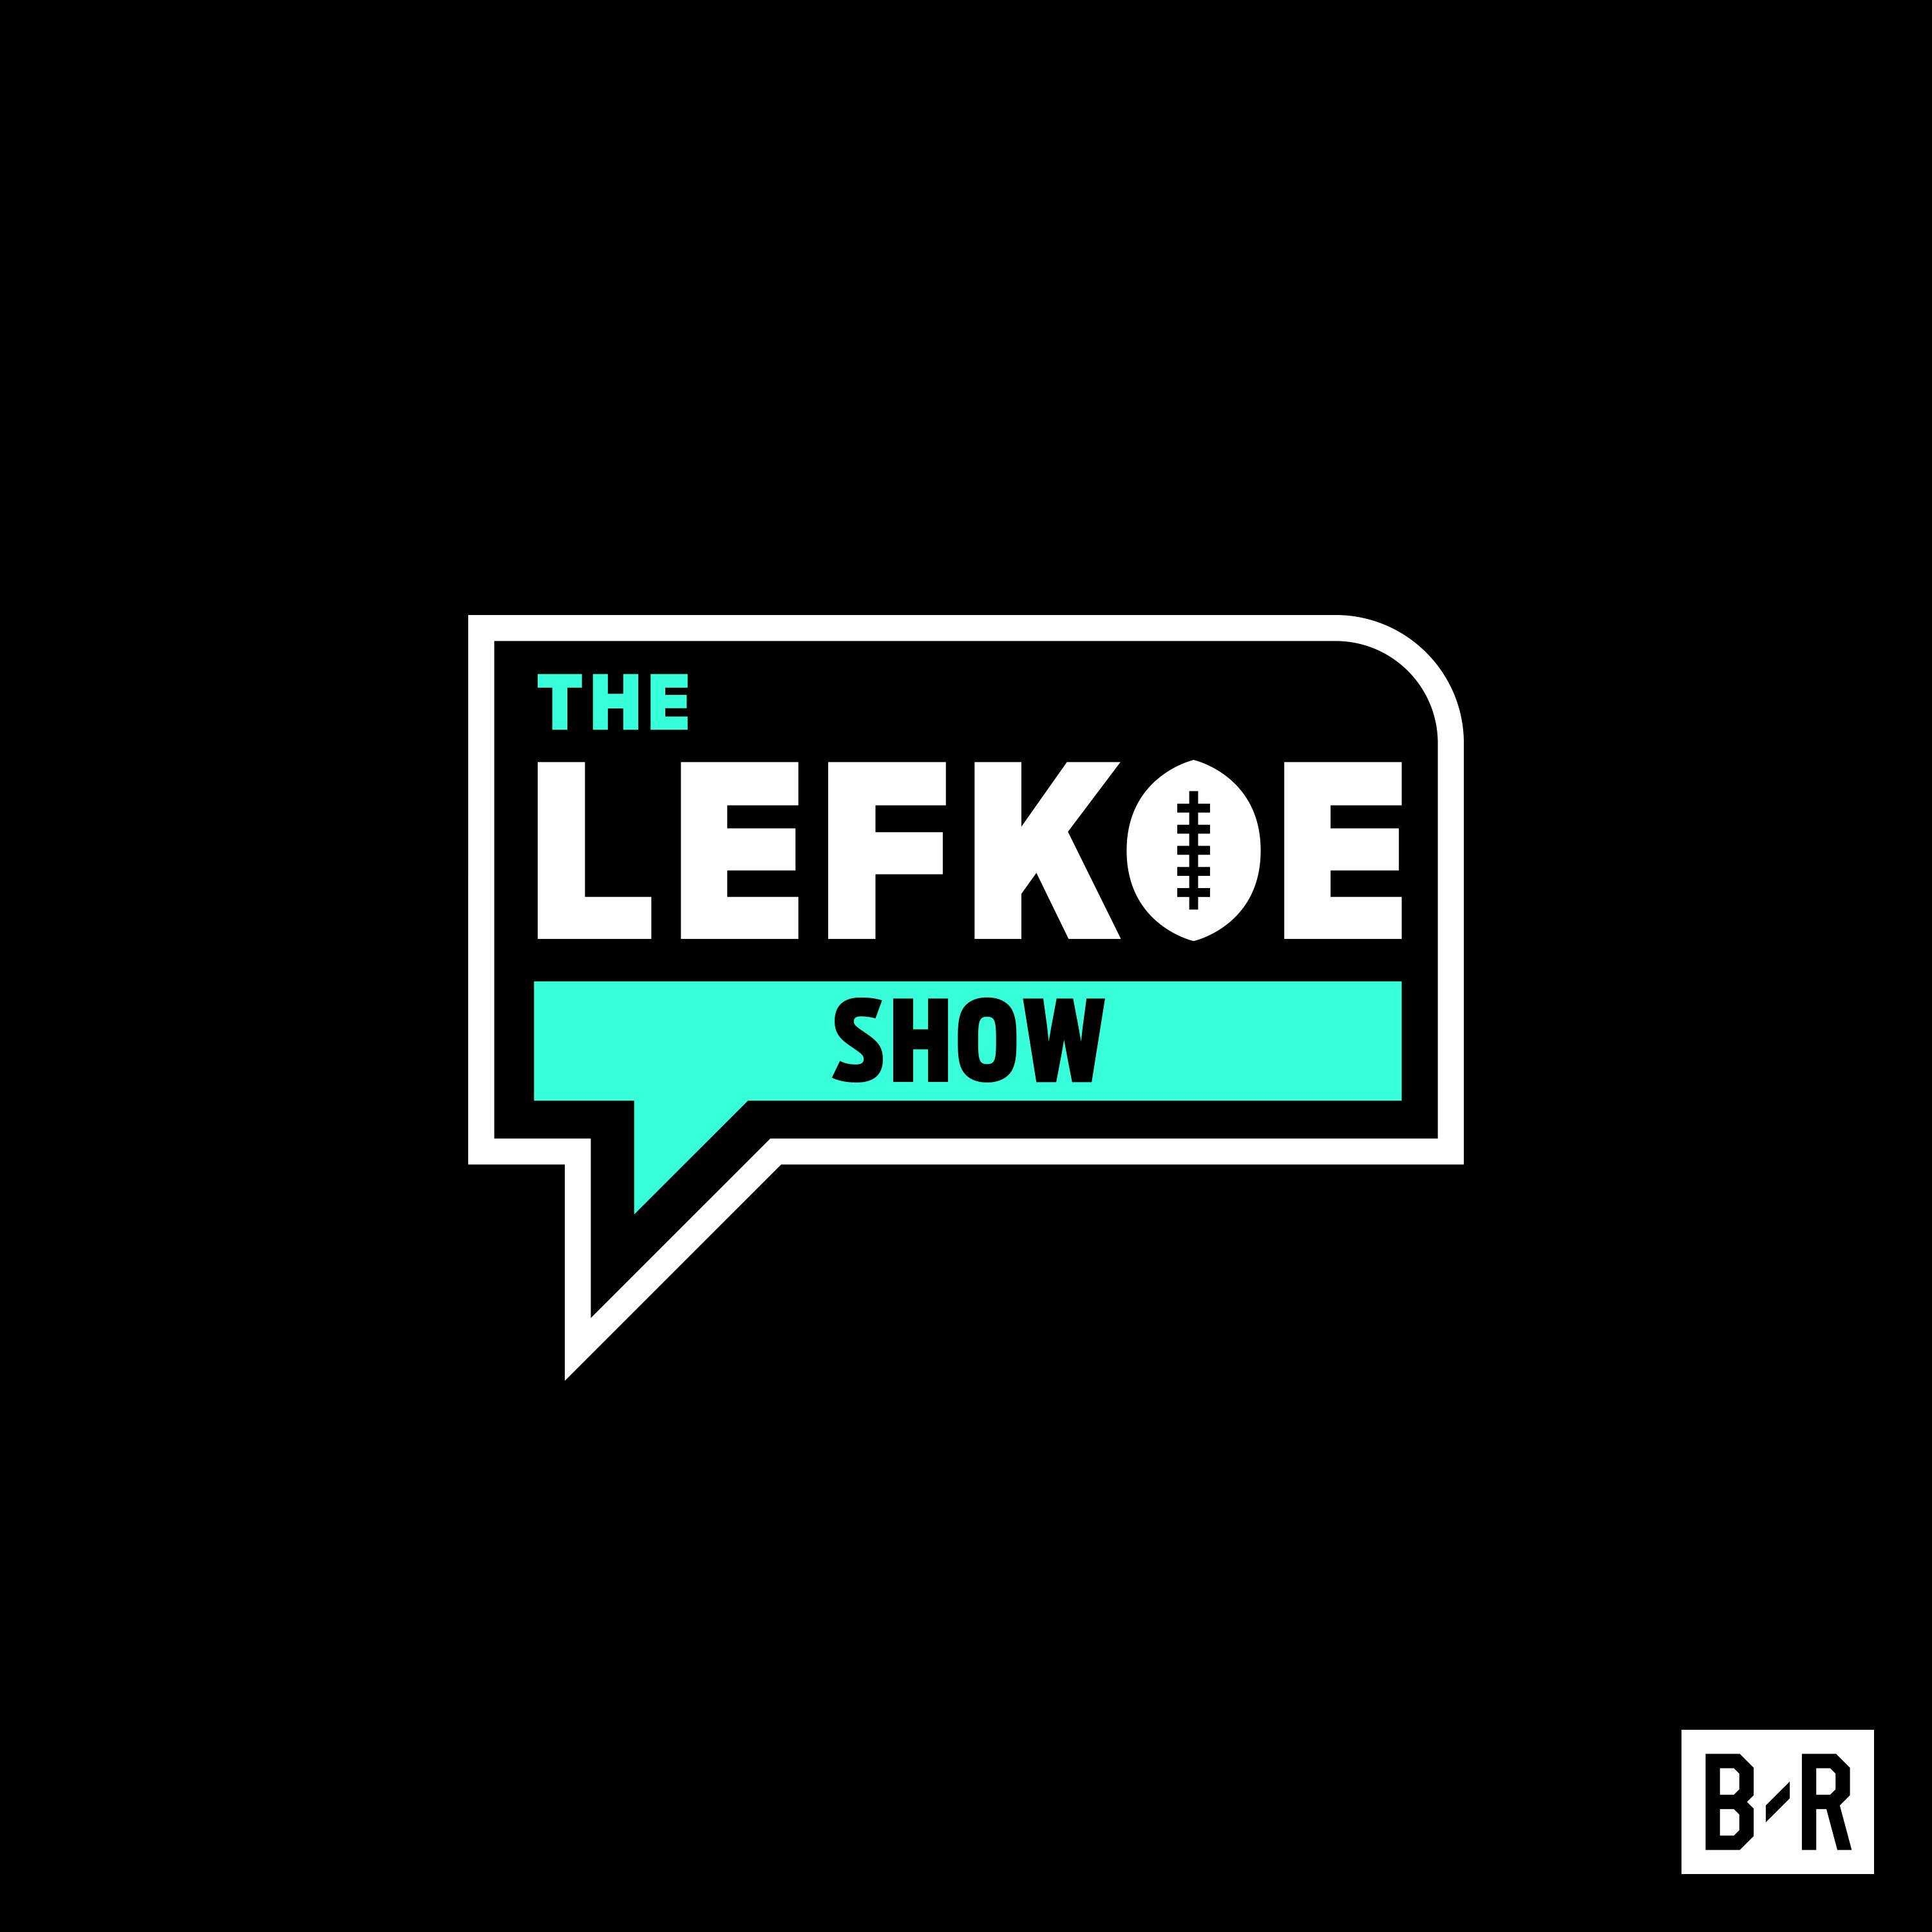 Fantasy Footballers On Potential Rookie Studs, Aaron Rodgers Trade Rumors, and More! | The Lefkoe Show